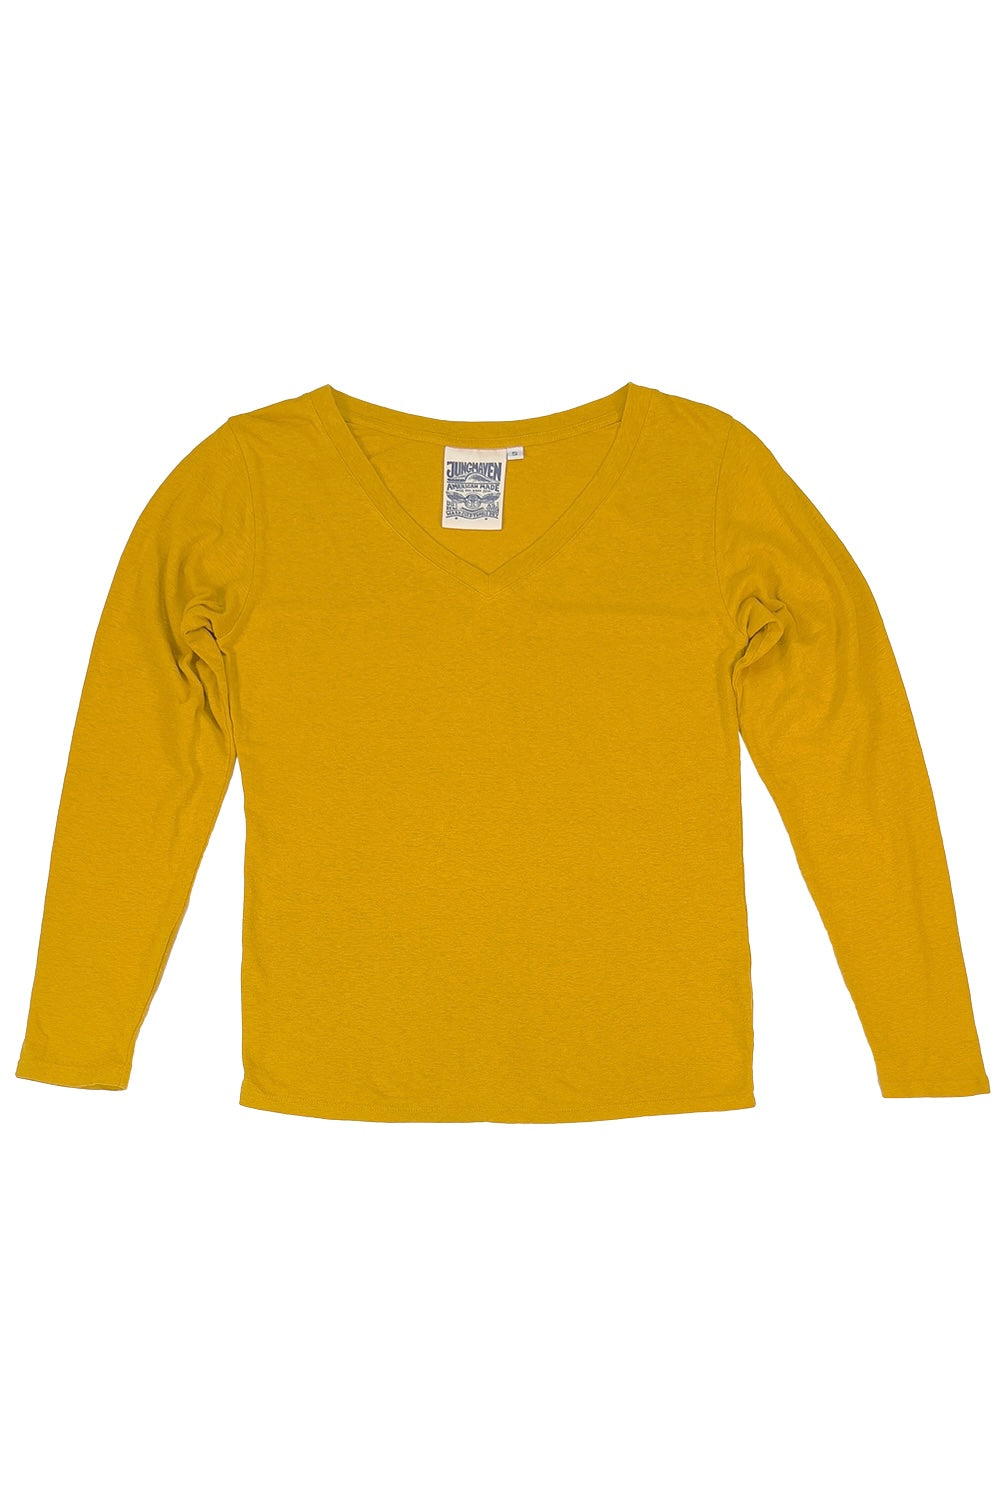 Finch Long Sleeve V-neck | Jungmaven Hemp Clothing & Accessories / Color: Spicy Mustard